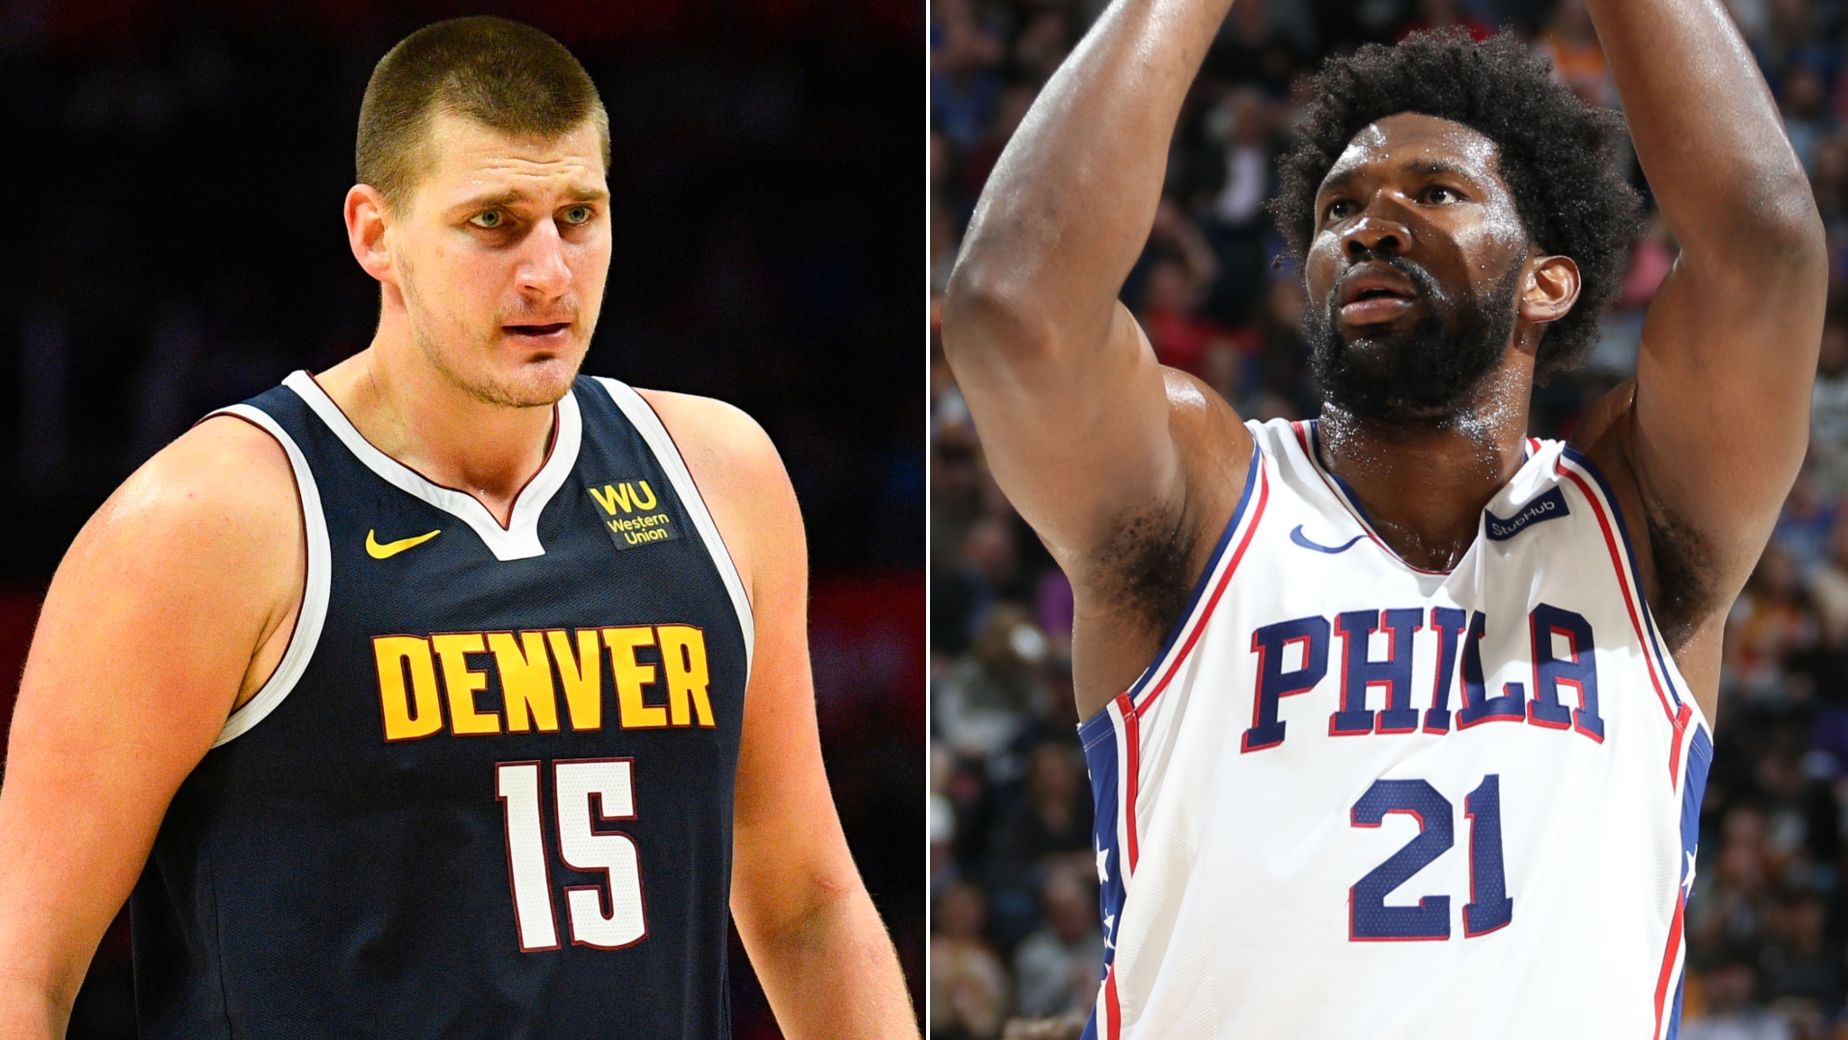 Would you rather have Embiid or Jokic on your team? - ESPN Video